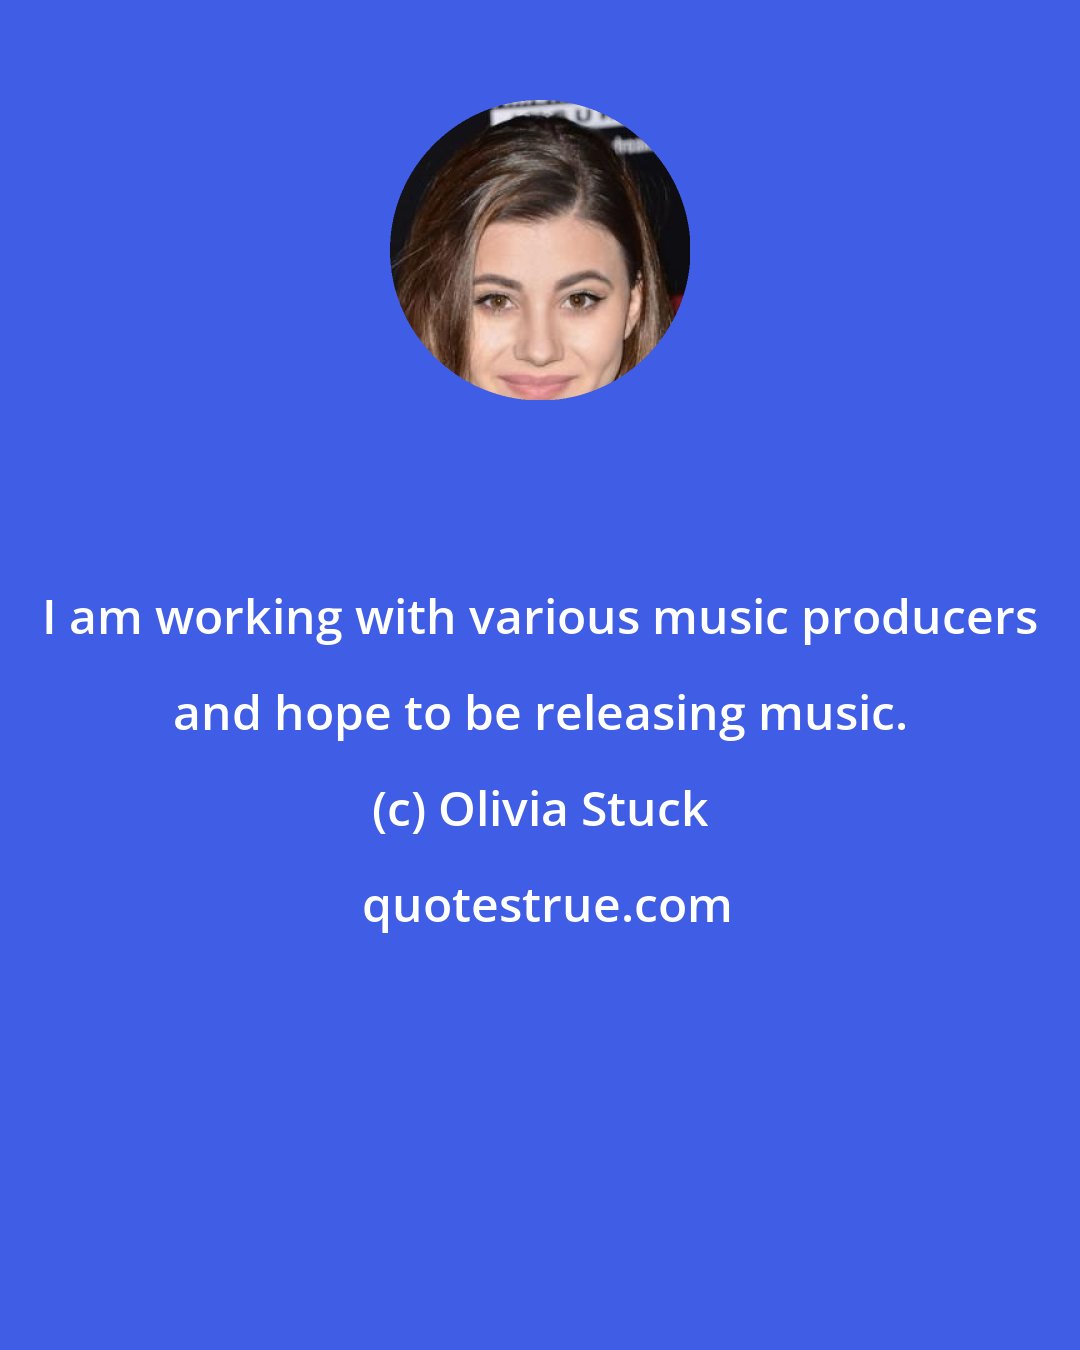 Olivia Stuck: I am working with various music producers and hope to be releasing music.